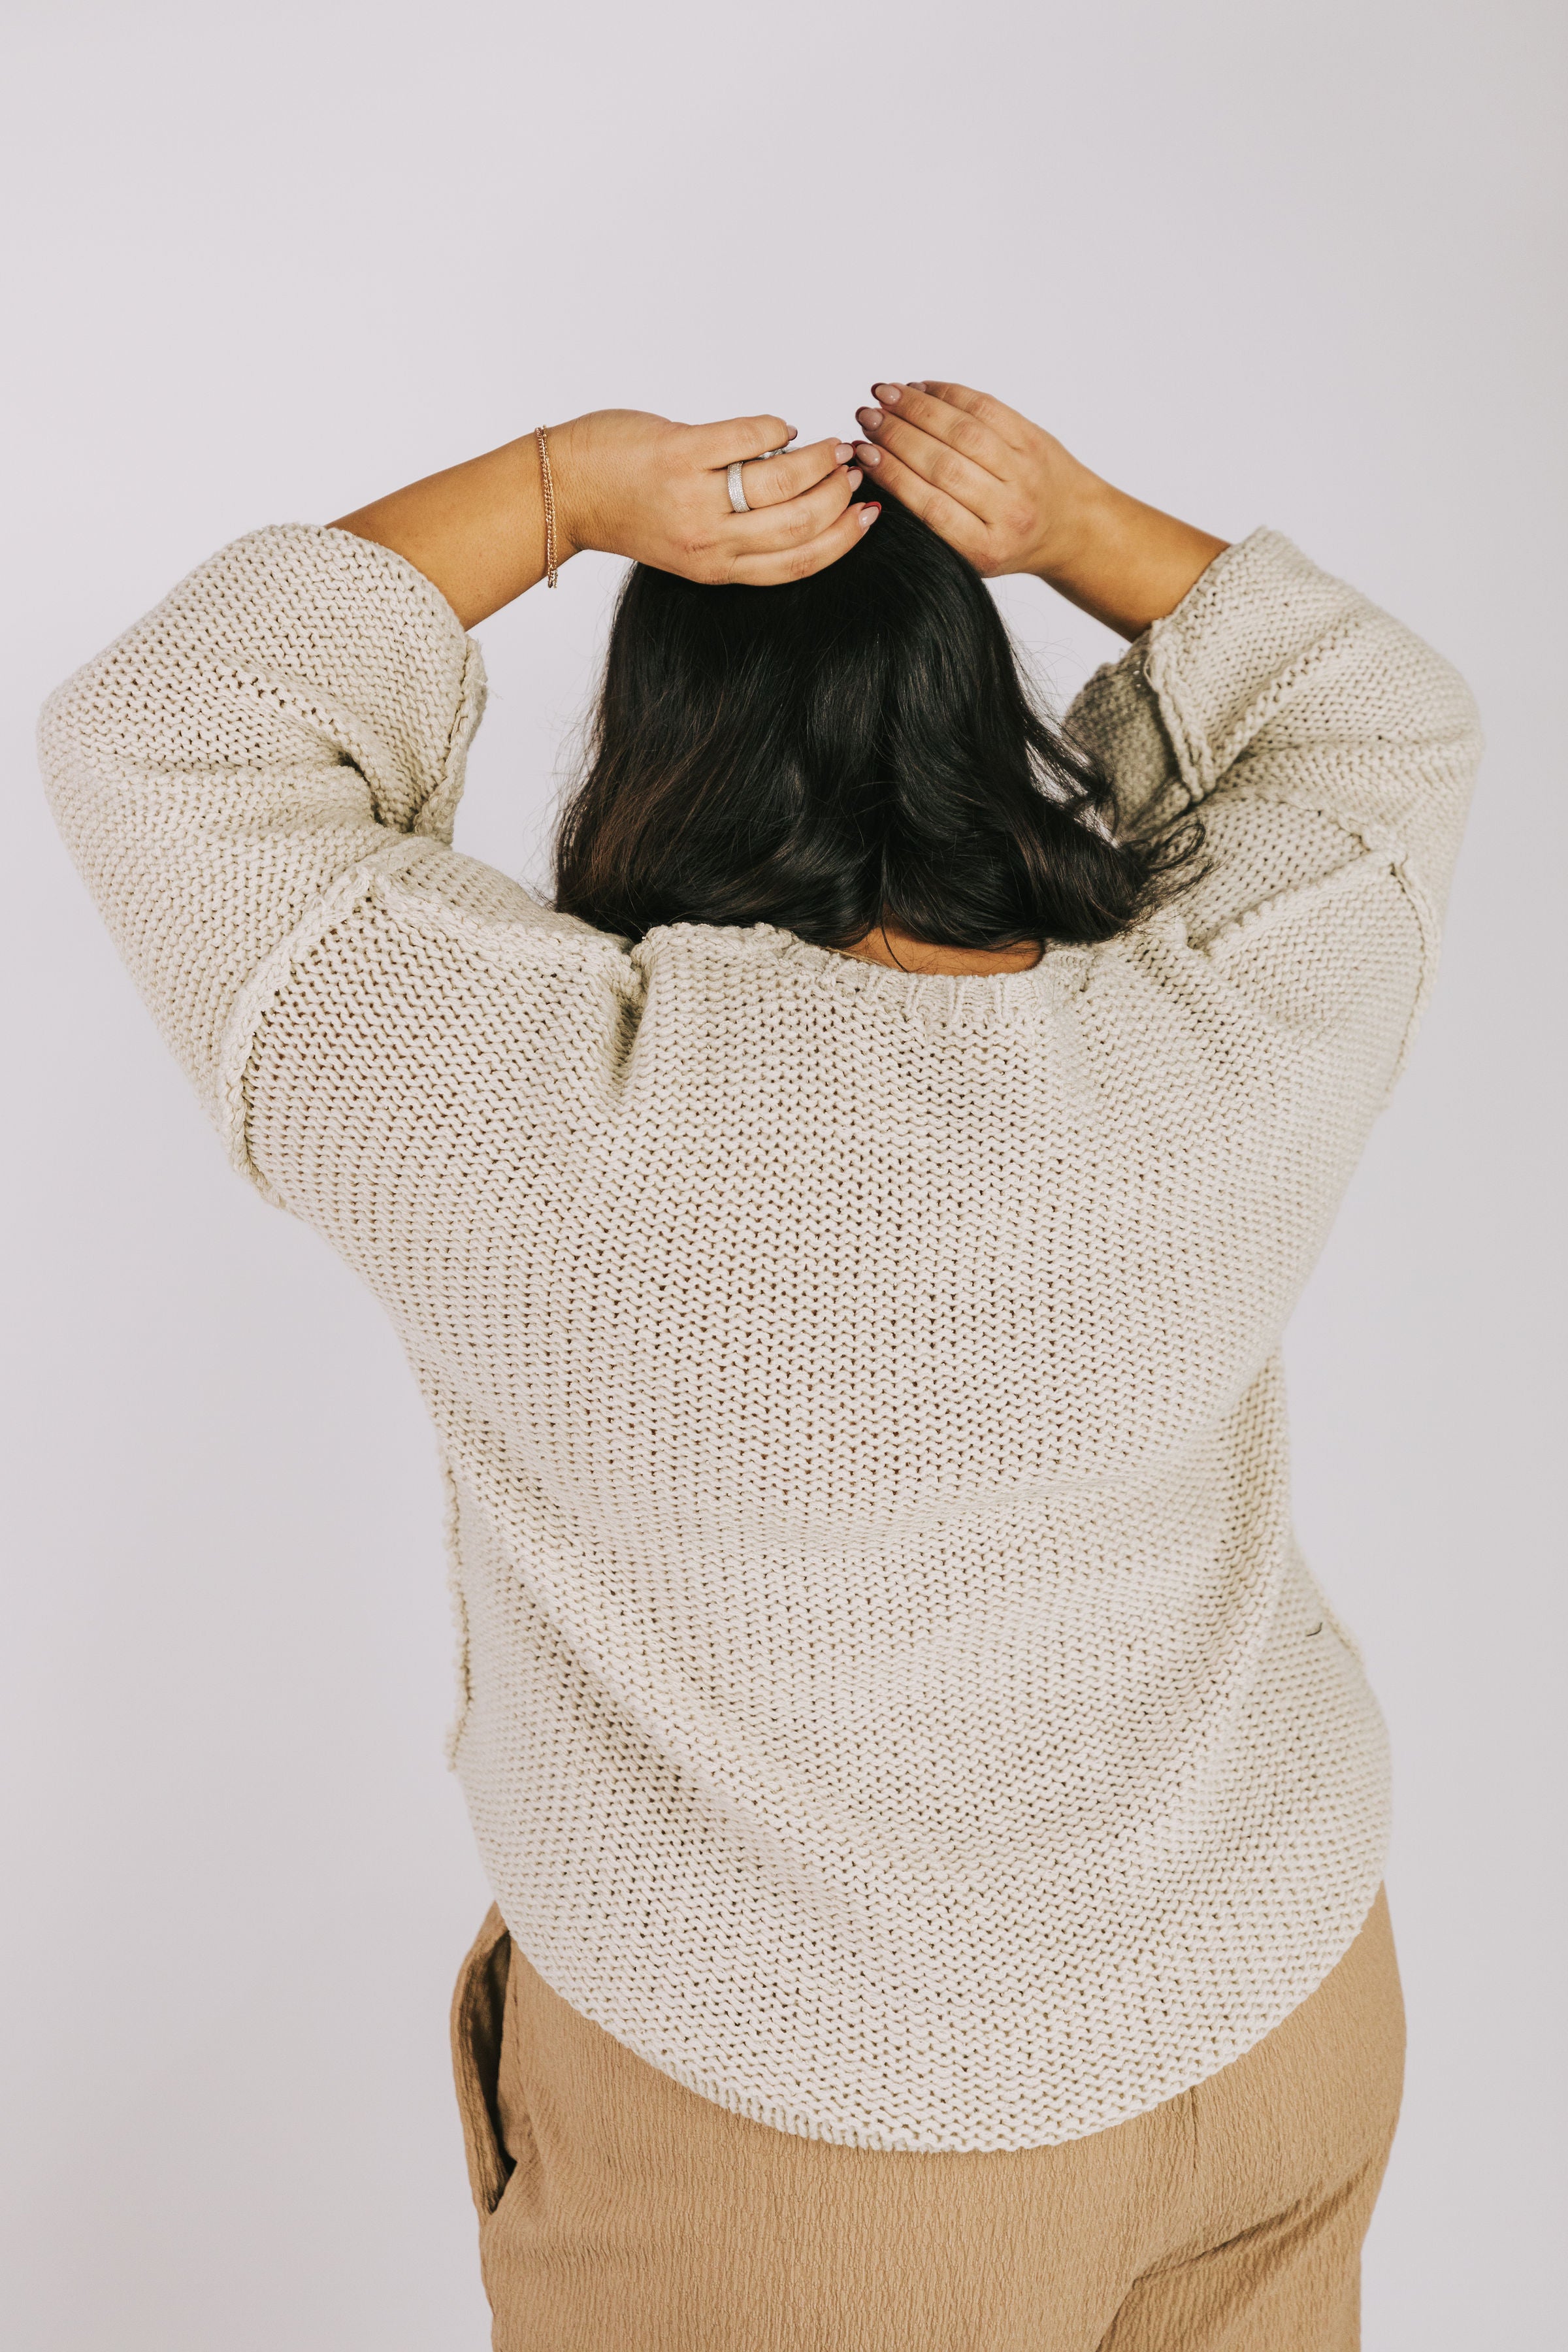 PLUS SIZE - Sure Thing Sweater